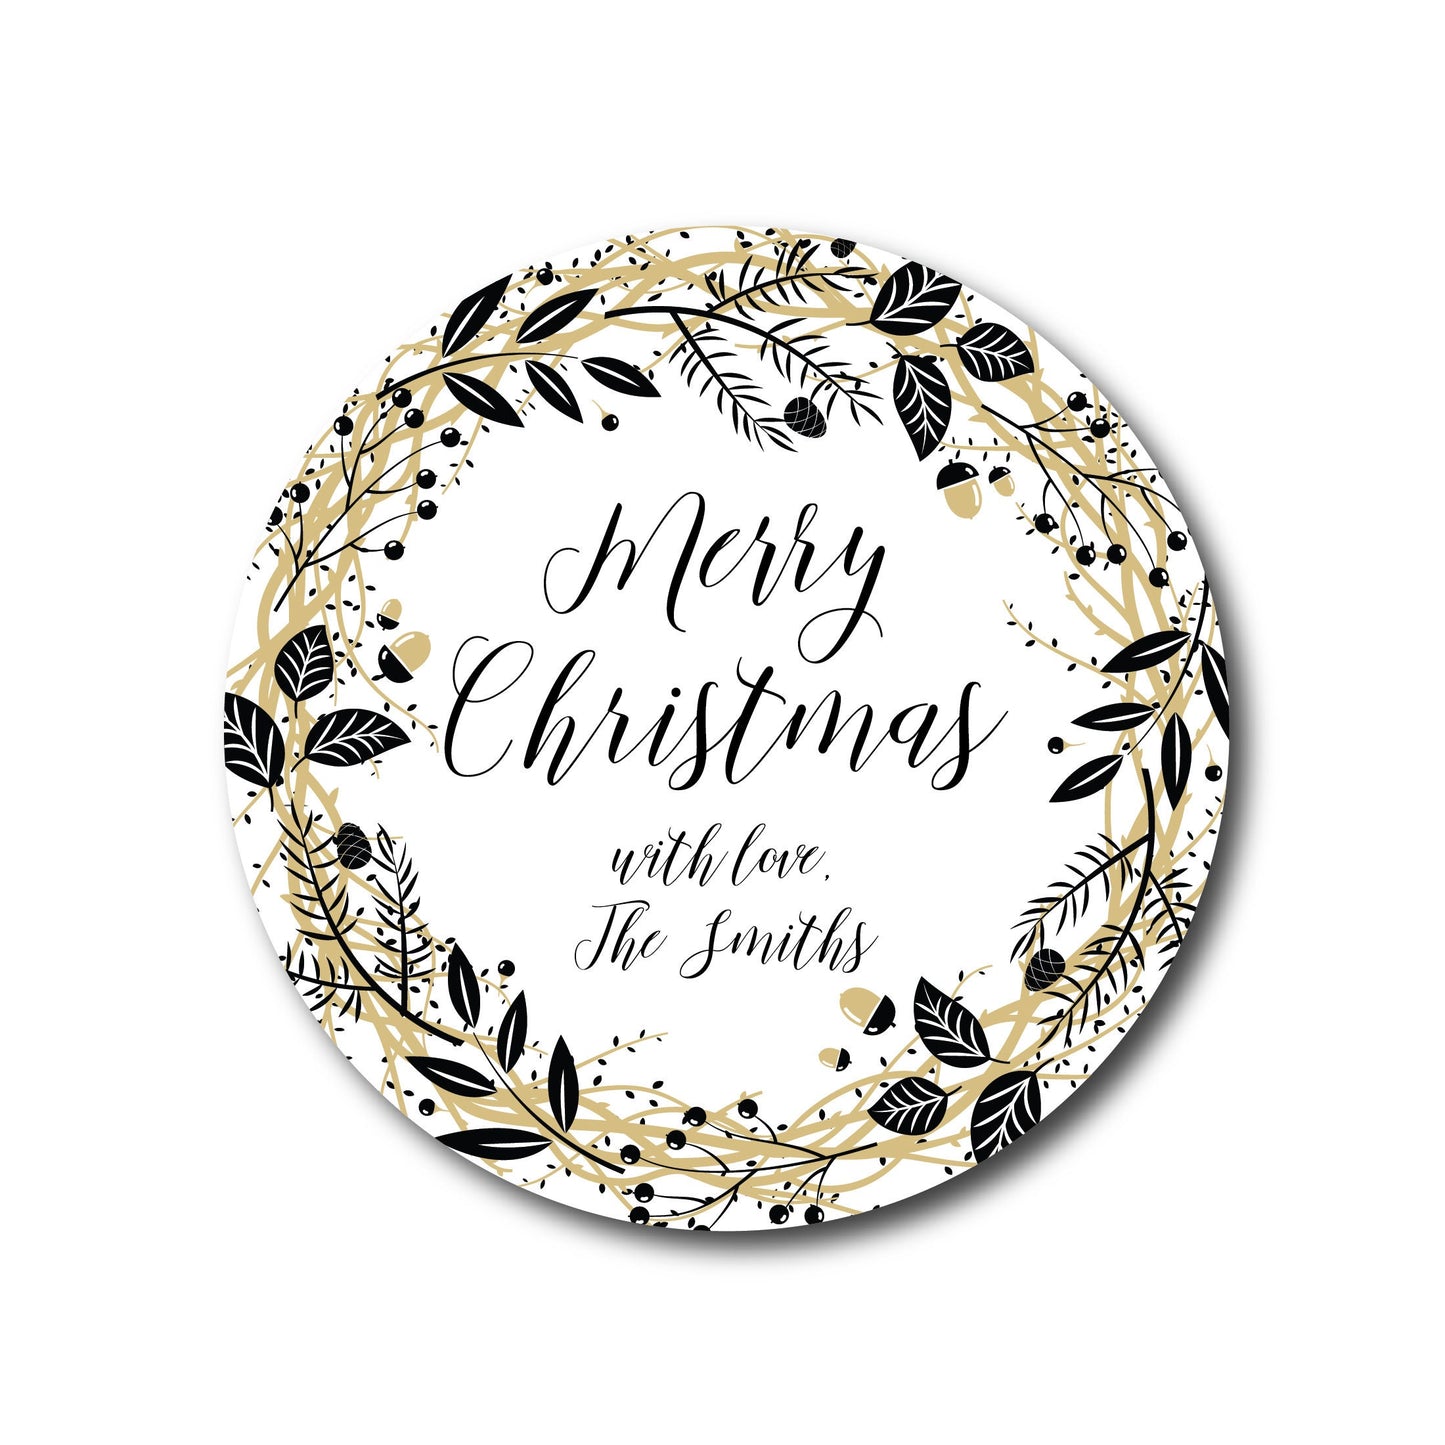 Christmas Gift Labels - Black and Gold Christmas Stickers Christmas Gift Sticker Personalized Gift Label Modern Holiday Labels Gold Wreath